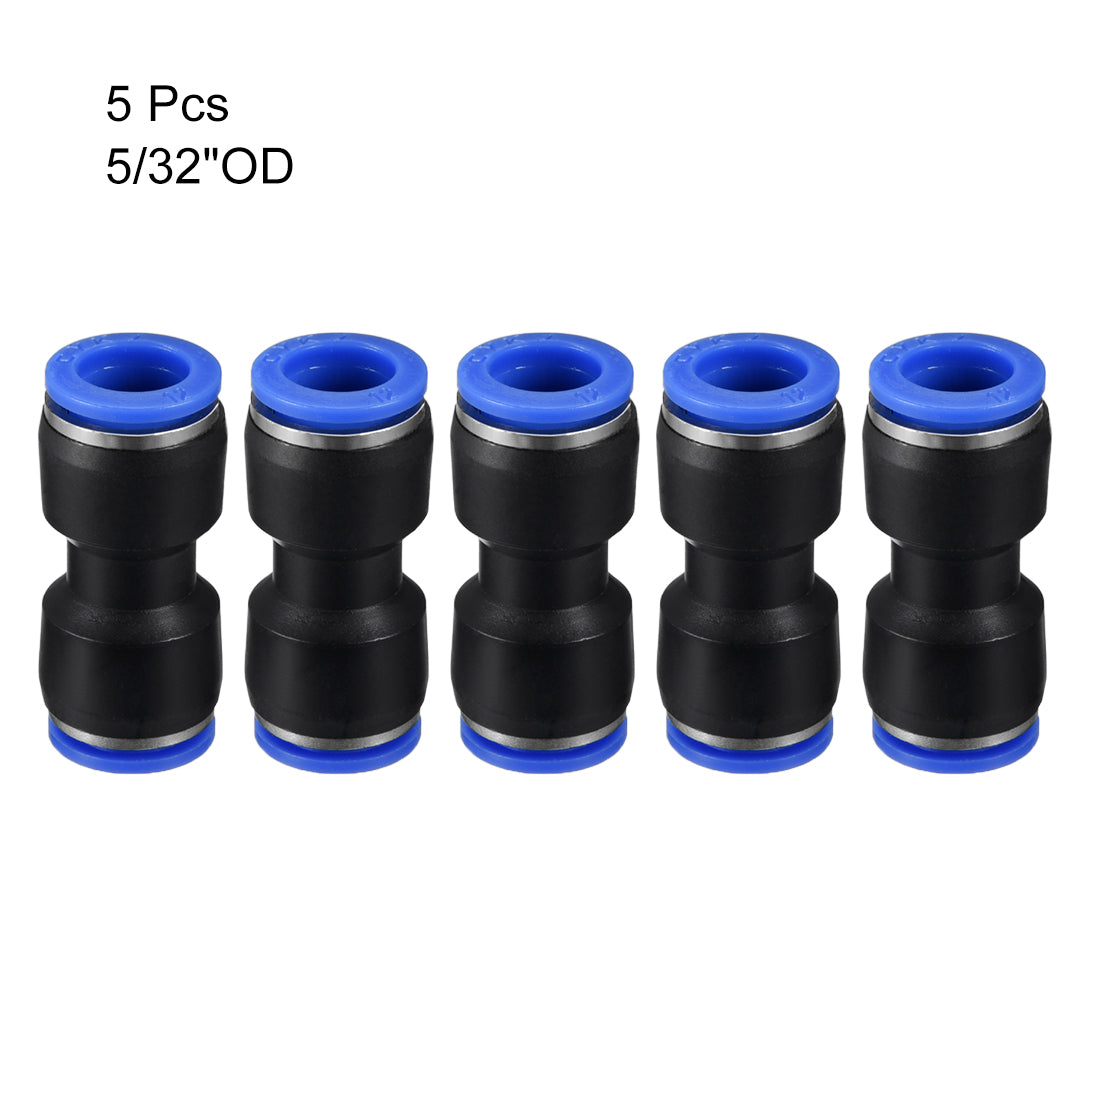 uxcell Uxcell 5pcs Push to Connect Fittings Tube Connect  12mm or 15/32" Straight OD Push Fit Fitting Tube Fittings Push Lock Blue